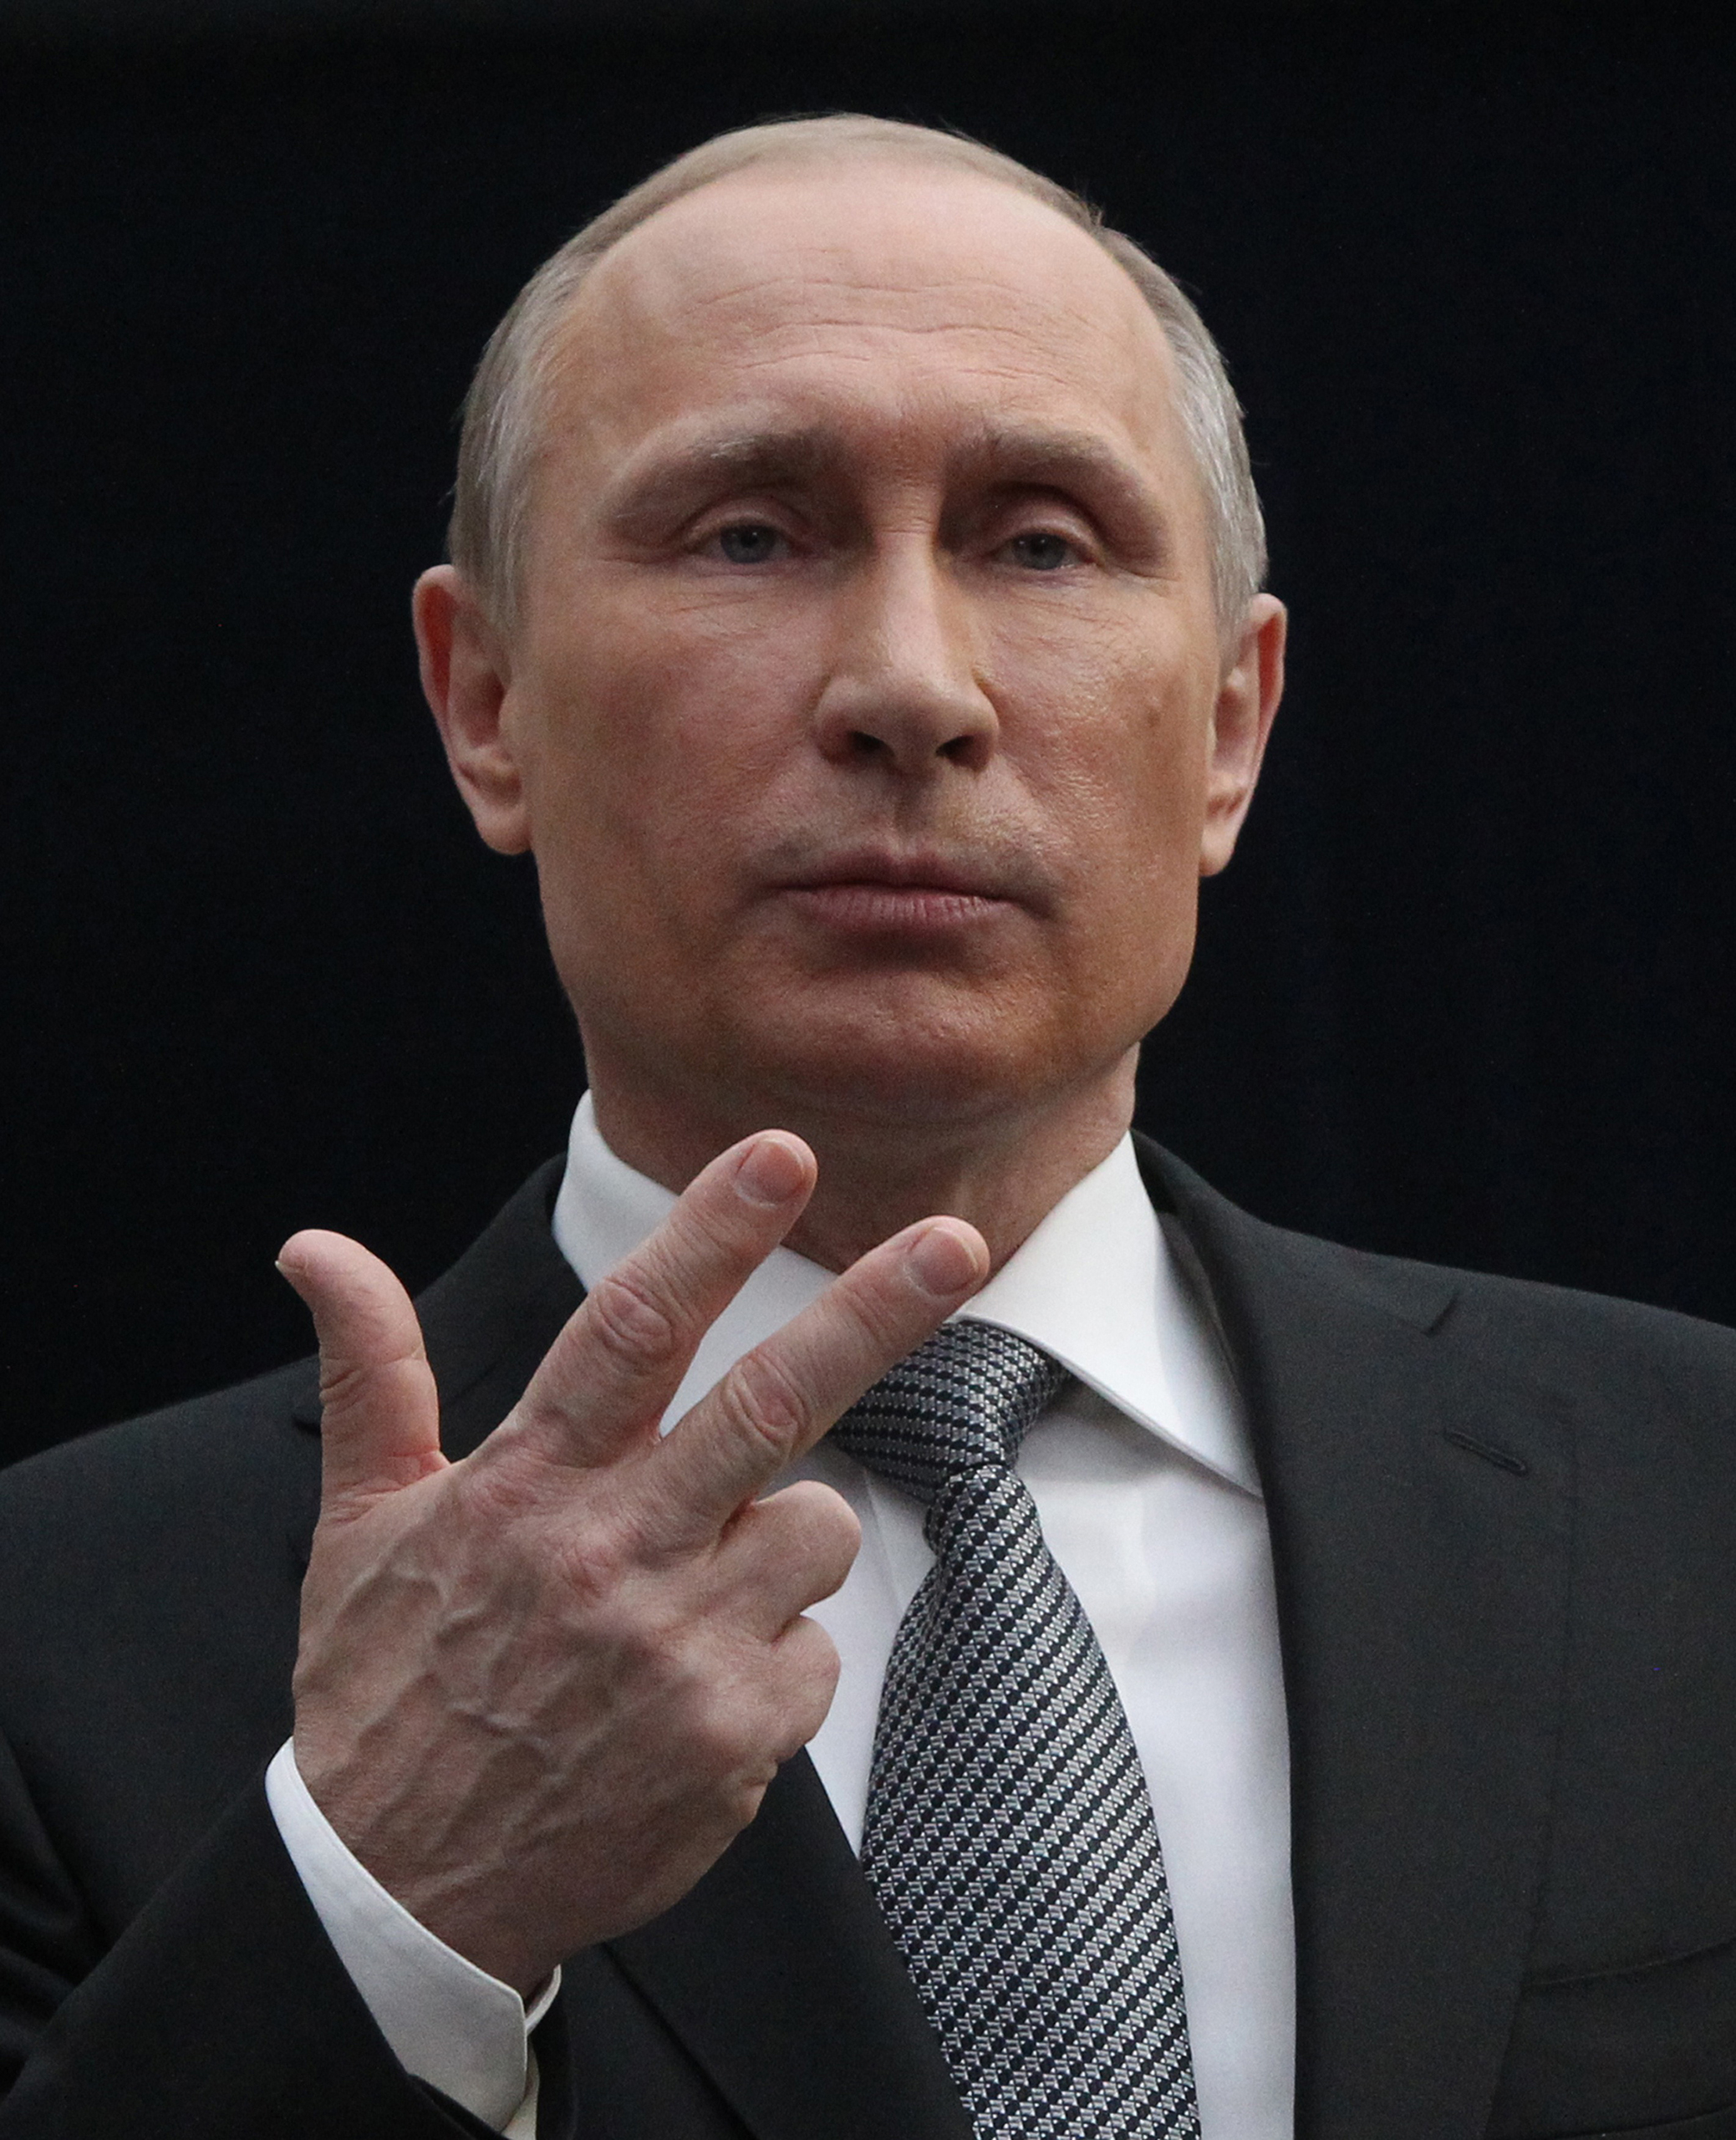 △ Russian President Vladimir Putin wants to make his country a global player once more